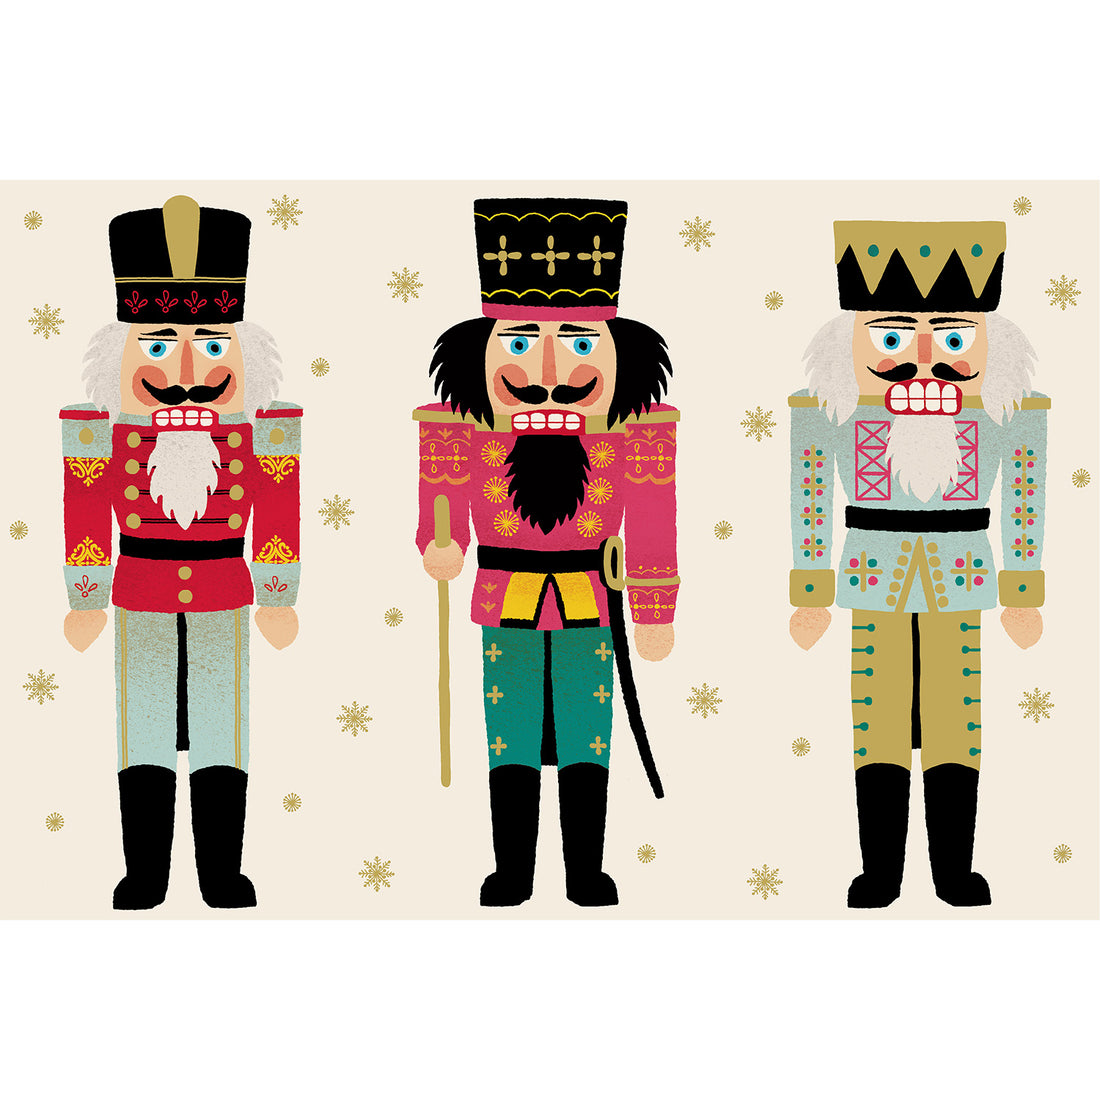 Three illustrated nutcracker soldiers, in red, green, teal, gold and black, surrounded by gold snowflakes, on a cream background.